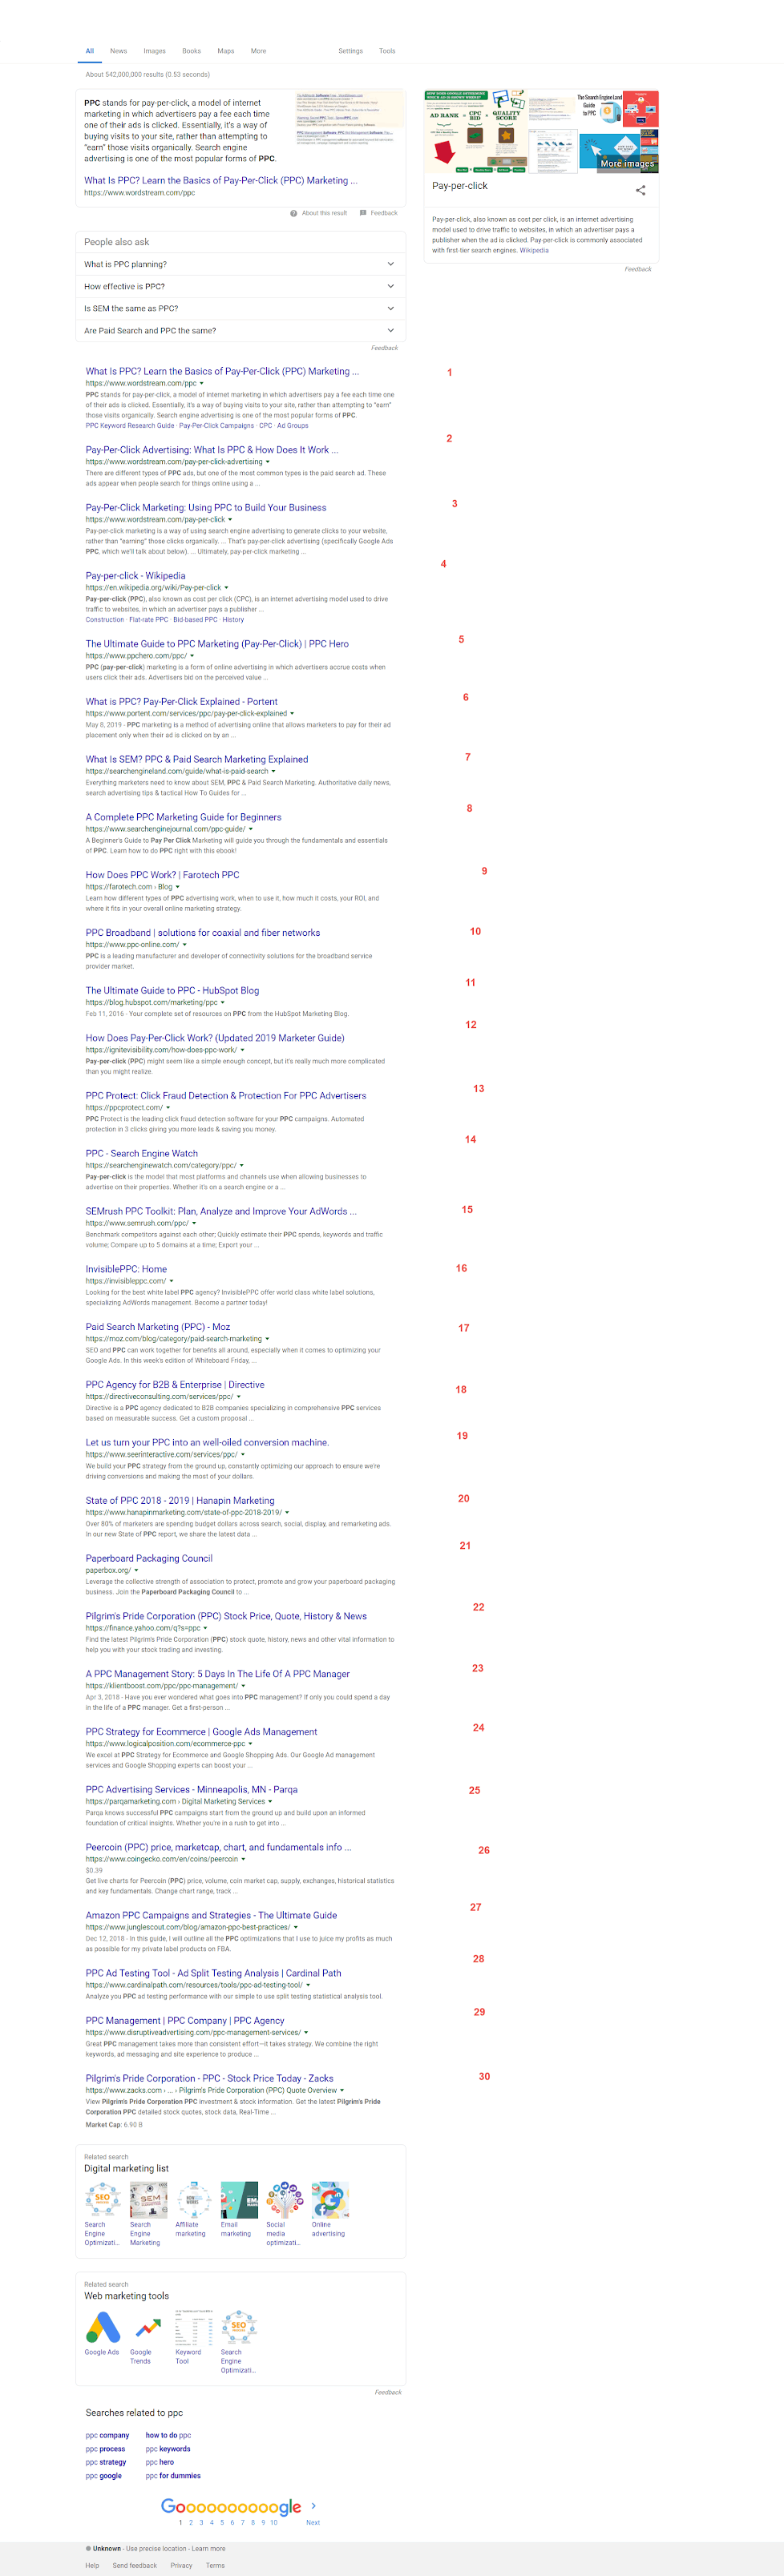 Google Displays an Unusual Search Page With 30 Results